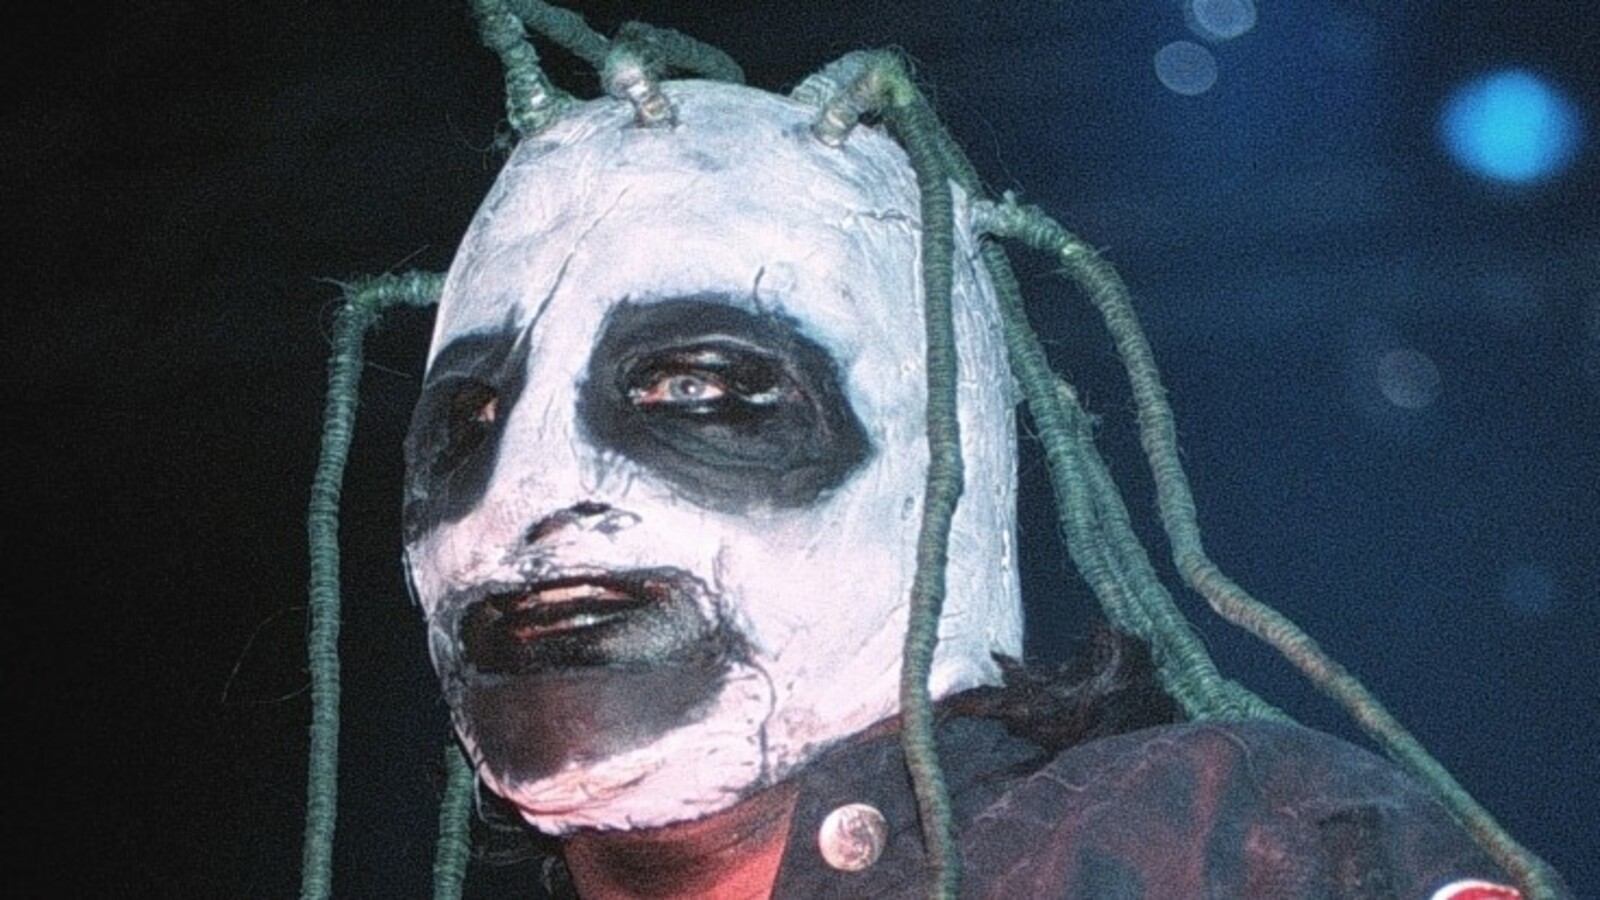 Corey Taylor's Slipknot Masks Ranked: From Worst to Best | Revolver